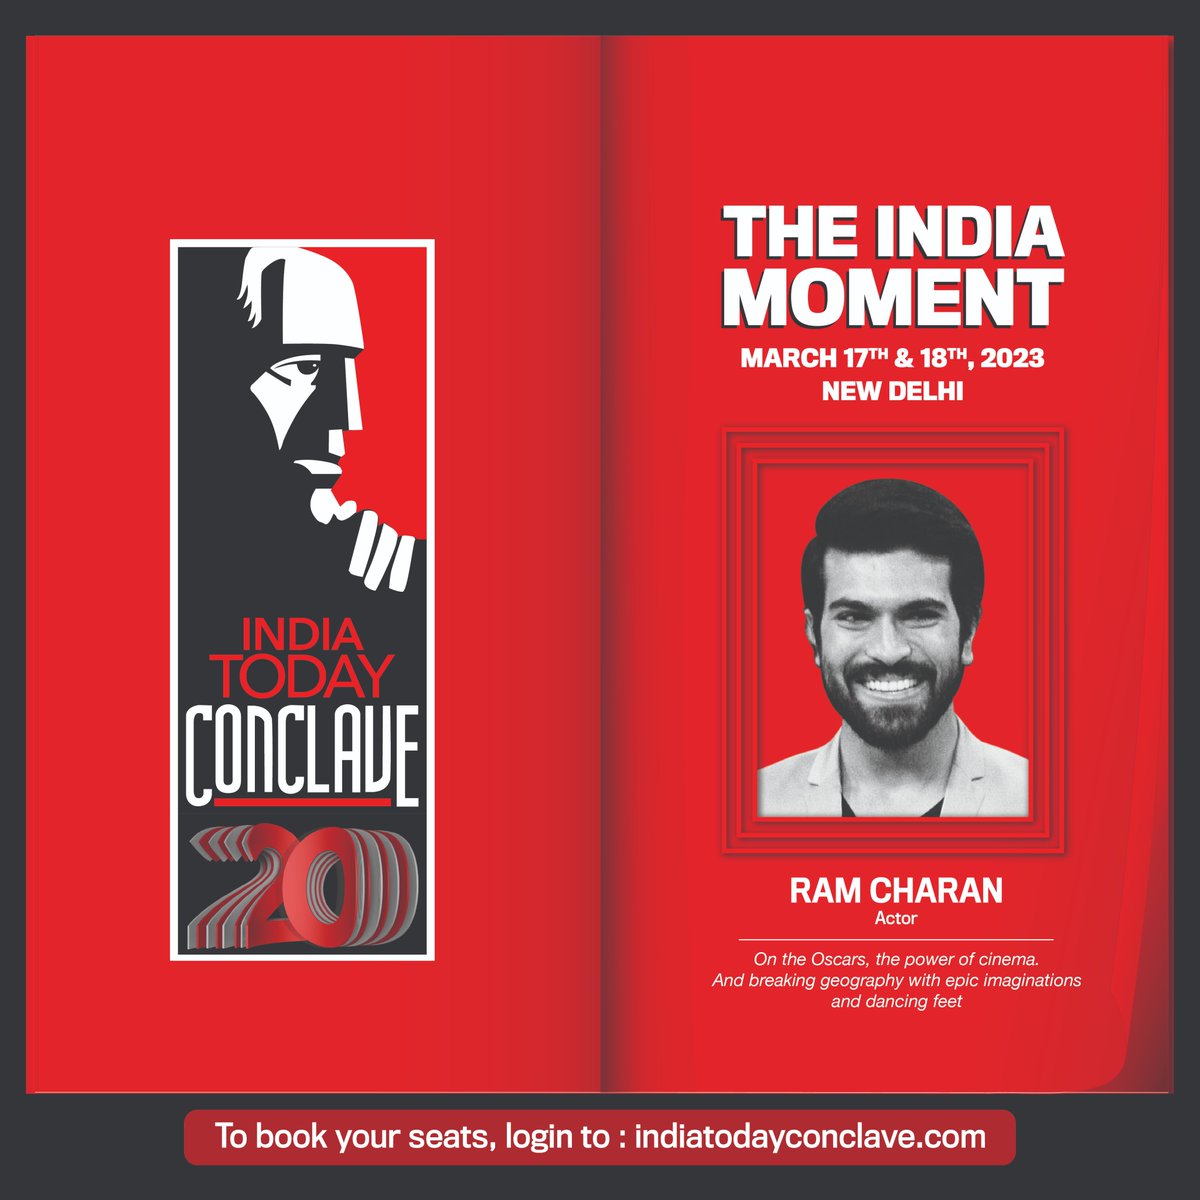 Meet @AlwaysRamCharan, at the #IndiaTodayConclave | March 17th & 18th, 2023, New Delhi.

Book your seat: indiatodayconclave.com

#TheIndiaMoment #Promo